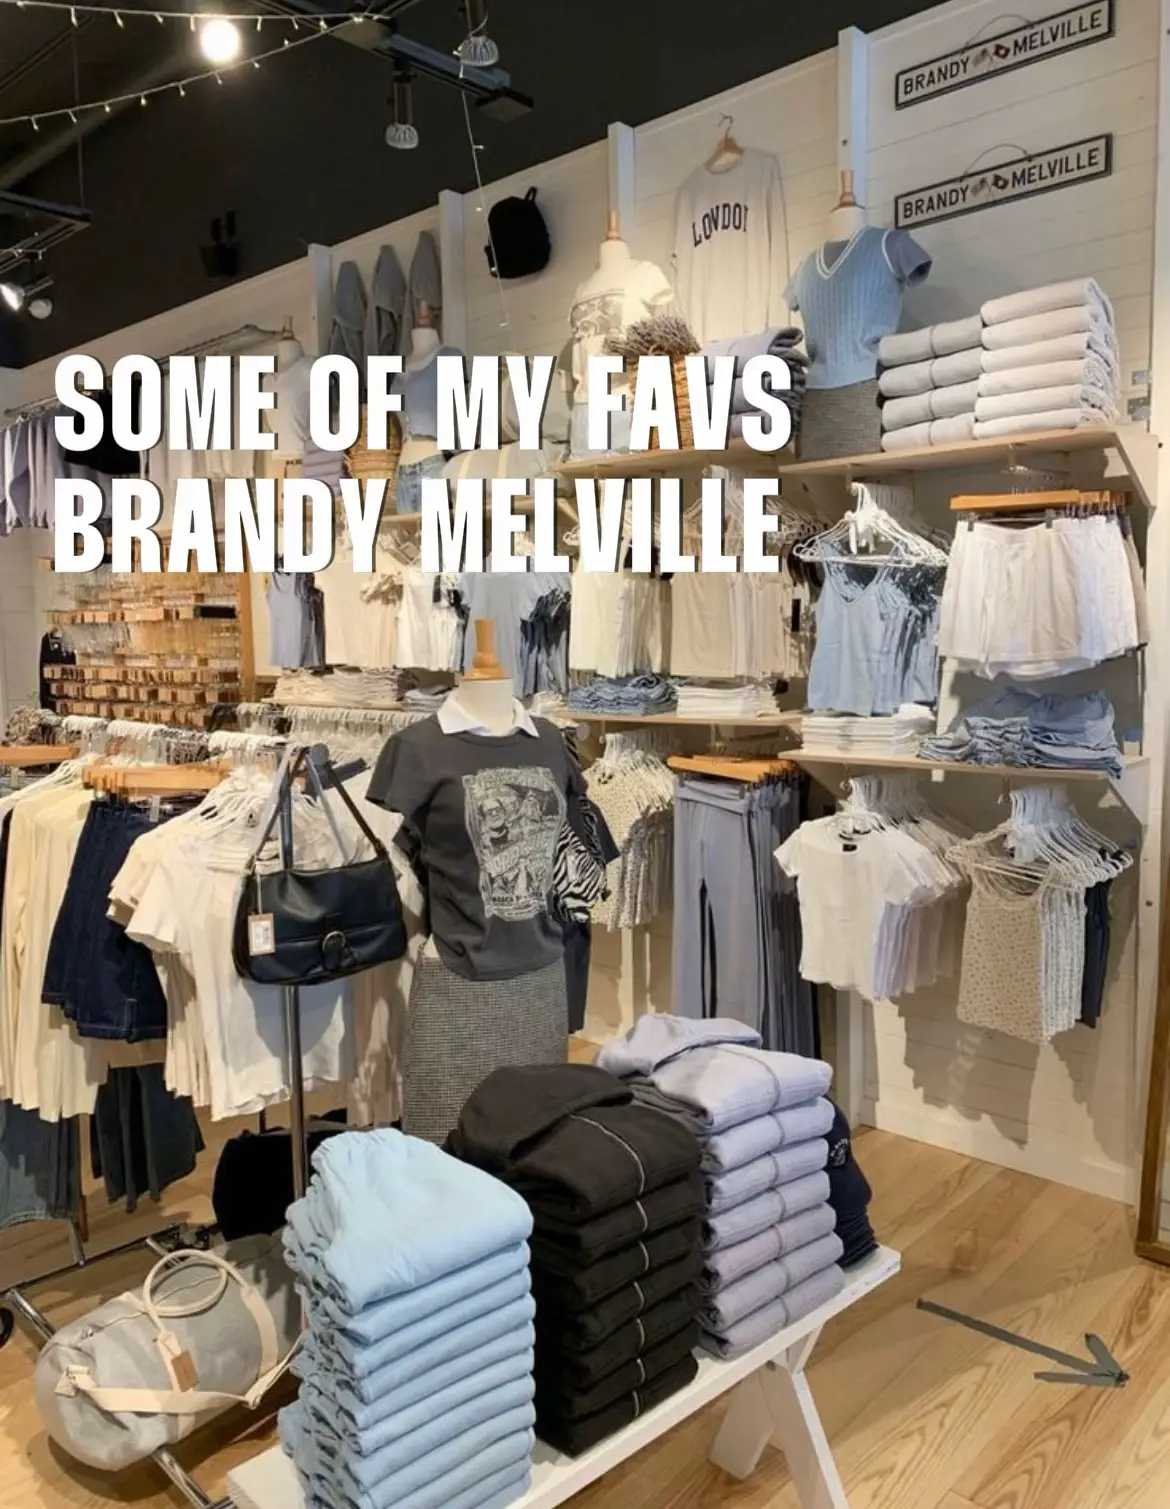 Brandy Melville Women's Clothes for sale in Mexico City, Mexico